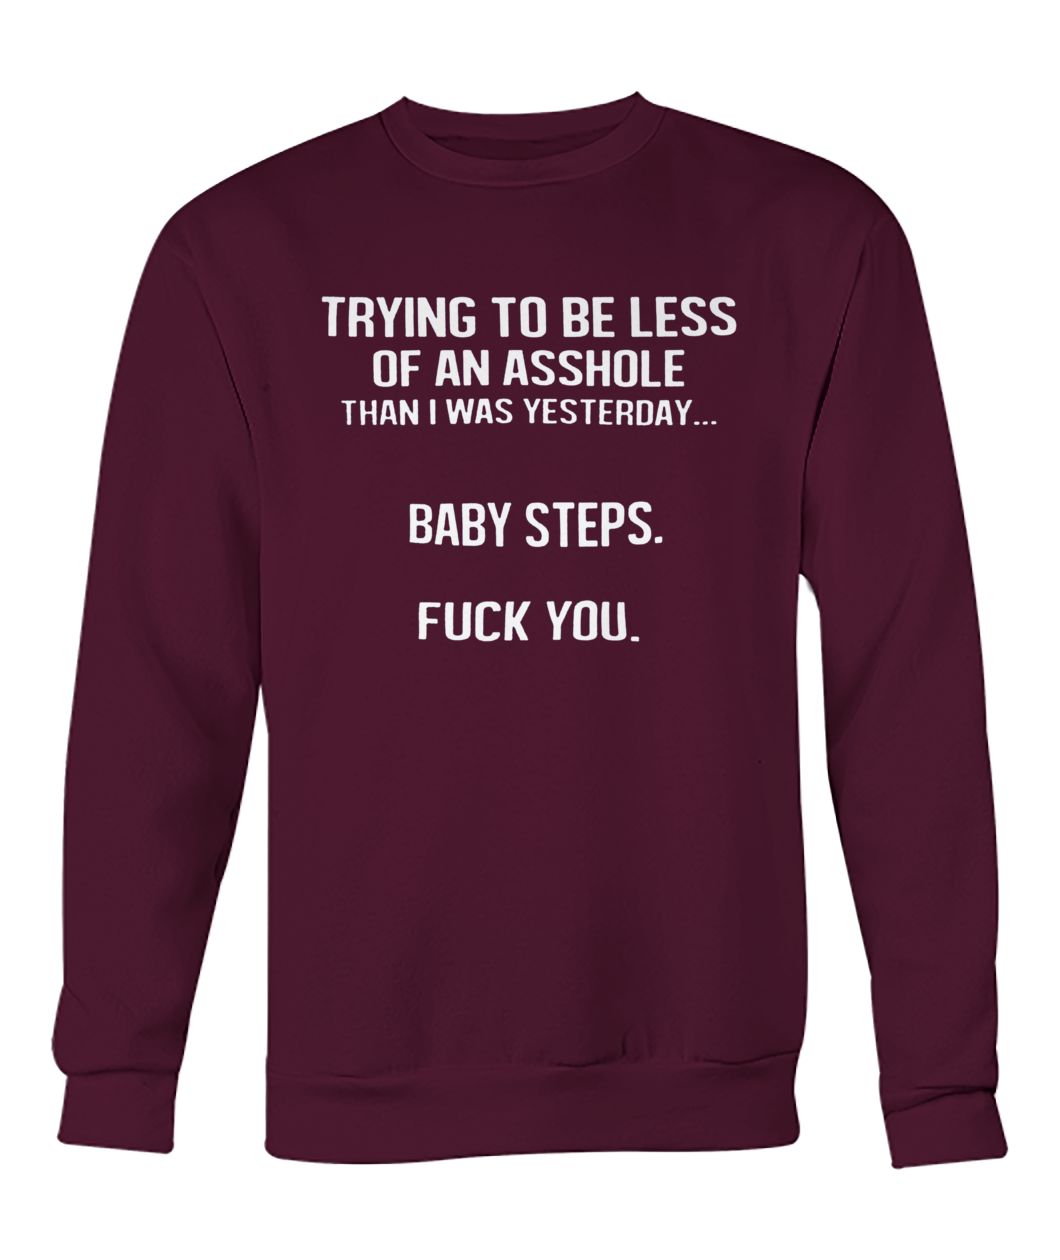 Trying to be less of an asshole than I was yesterday crew neck sweatshirt